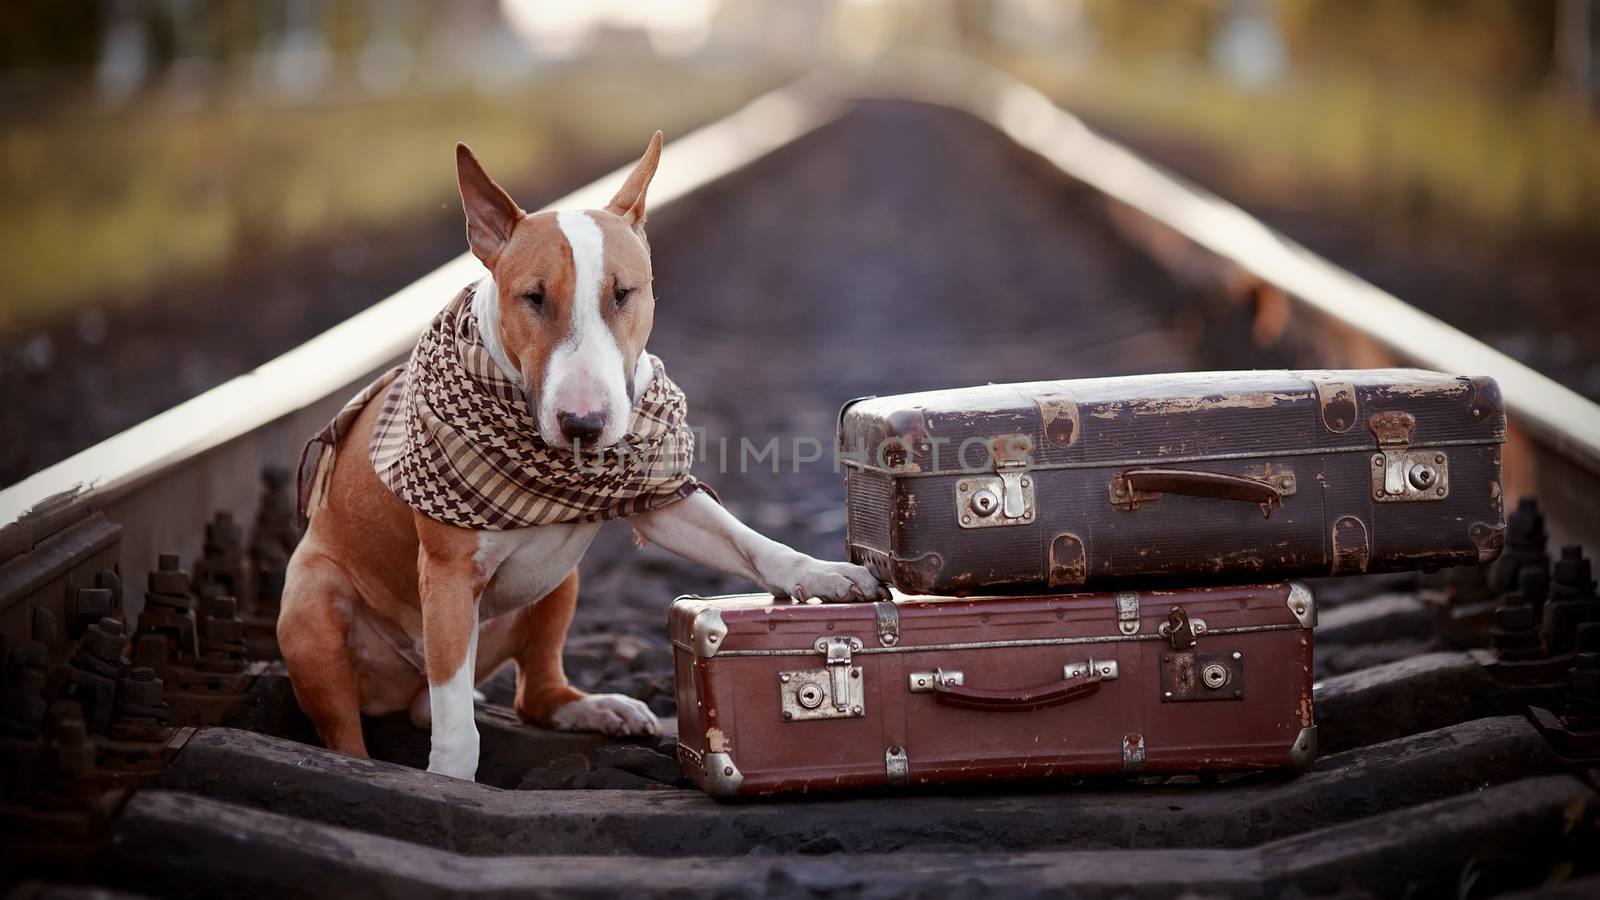 The bull terrier looks for the house. The dog waits for the owner. The lost dog. Bull terrier on the road. Dog on rails. Dog with suitcases.